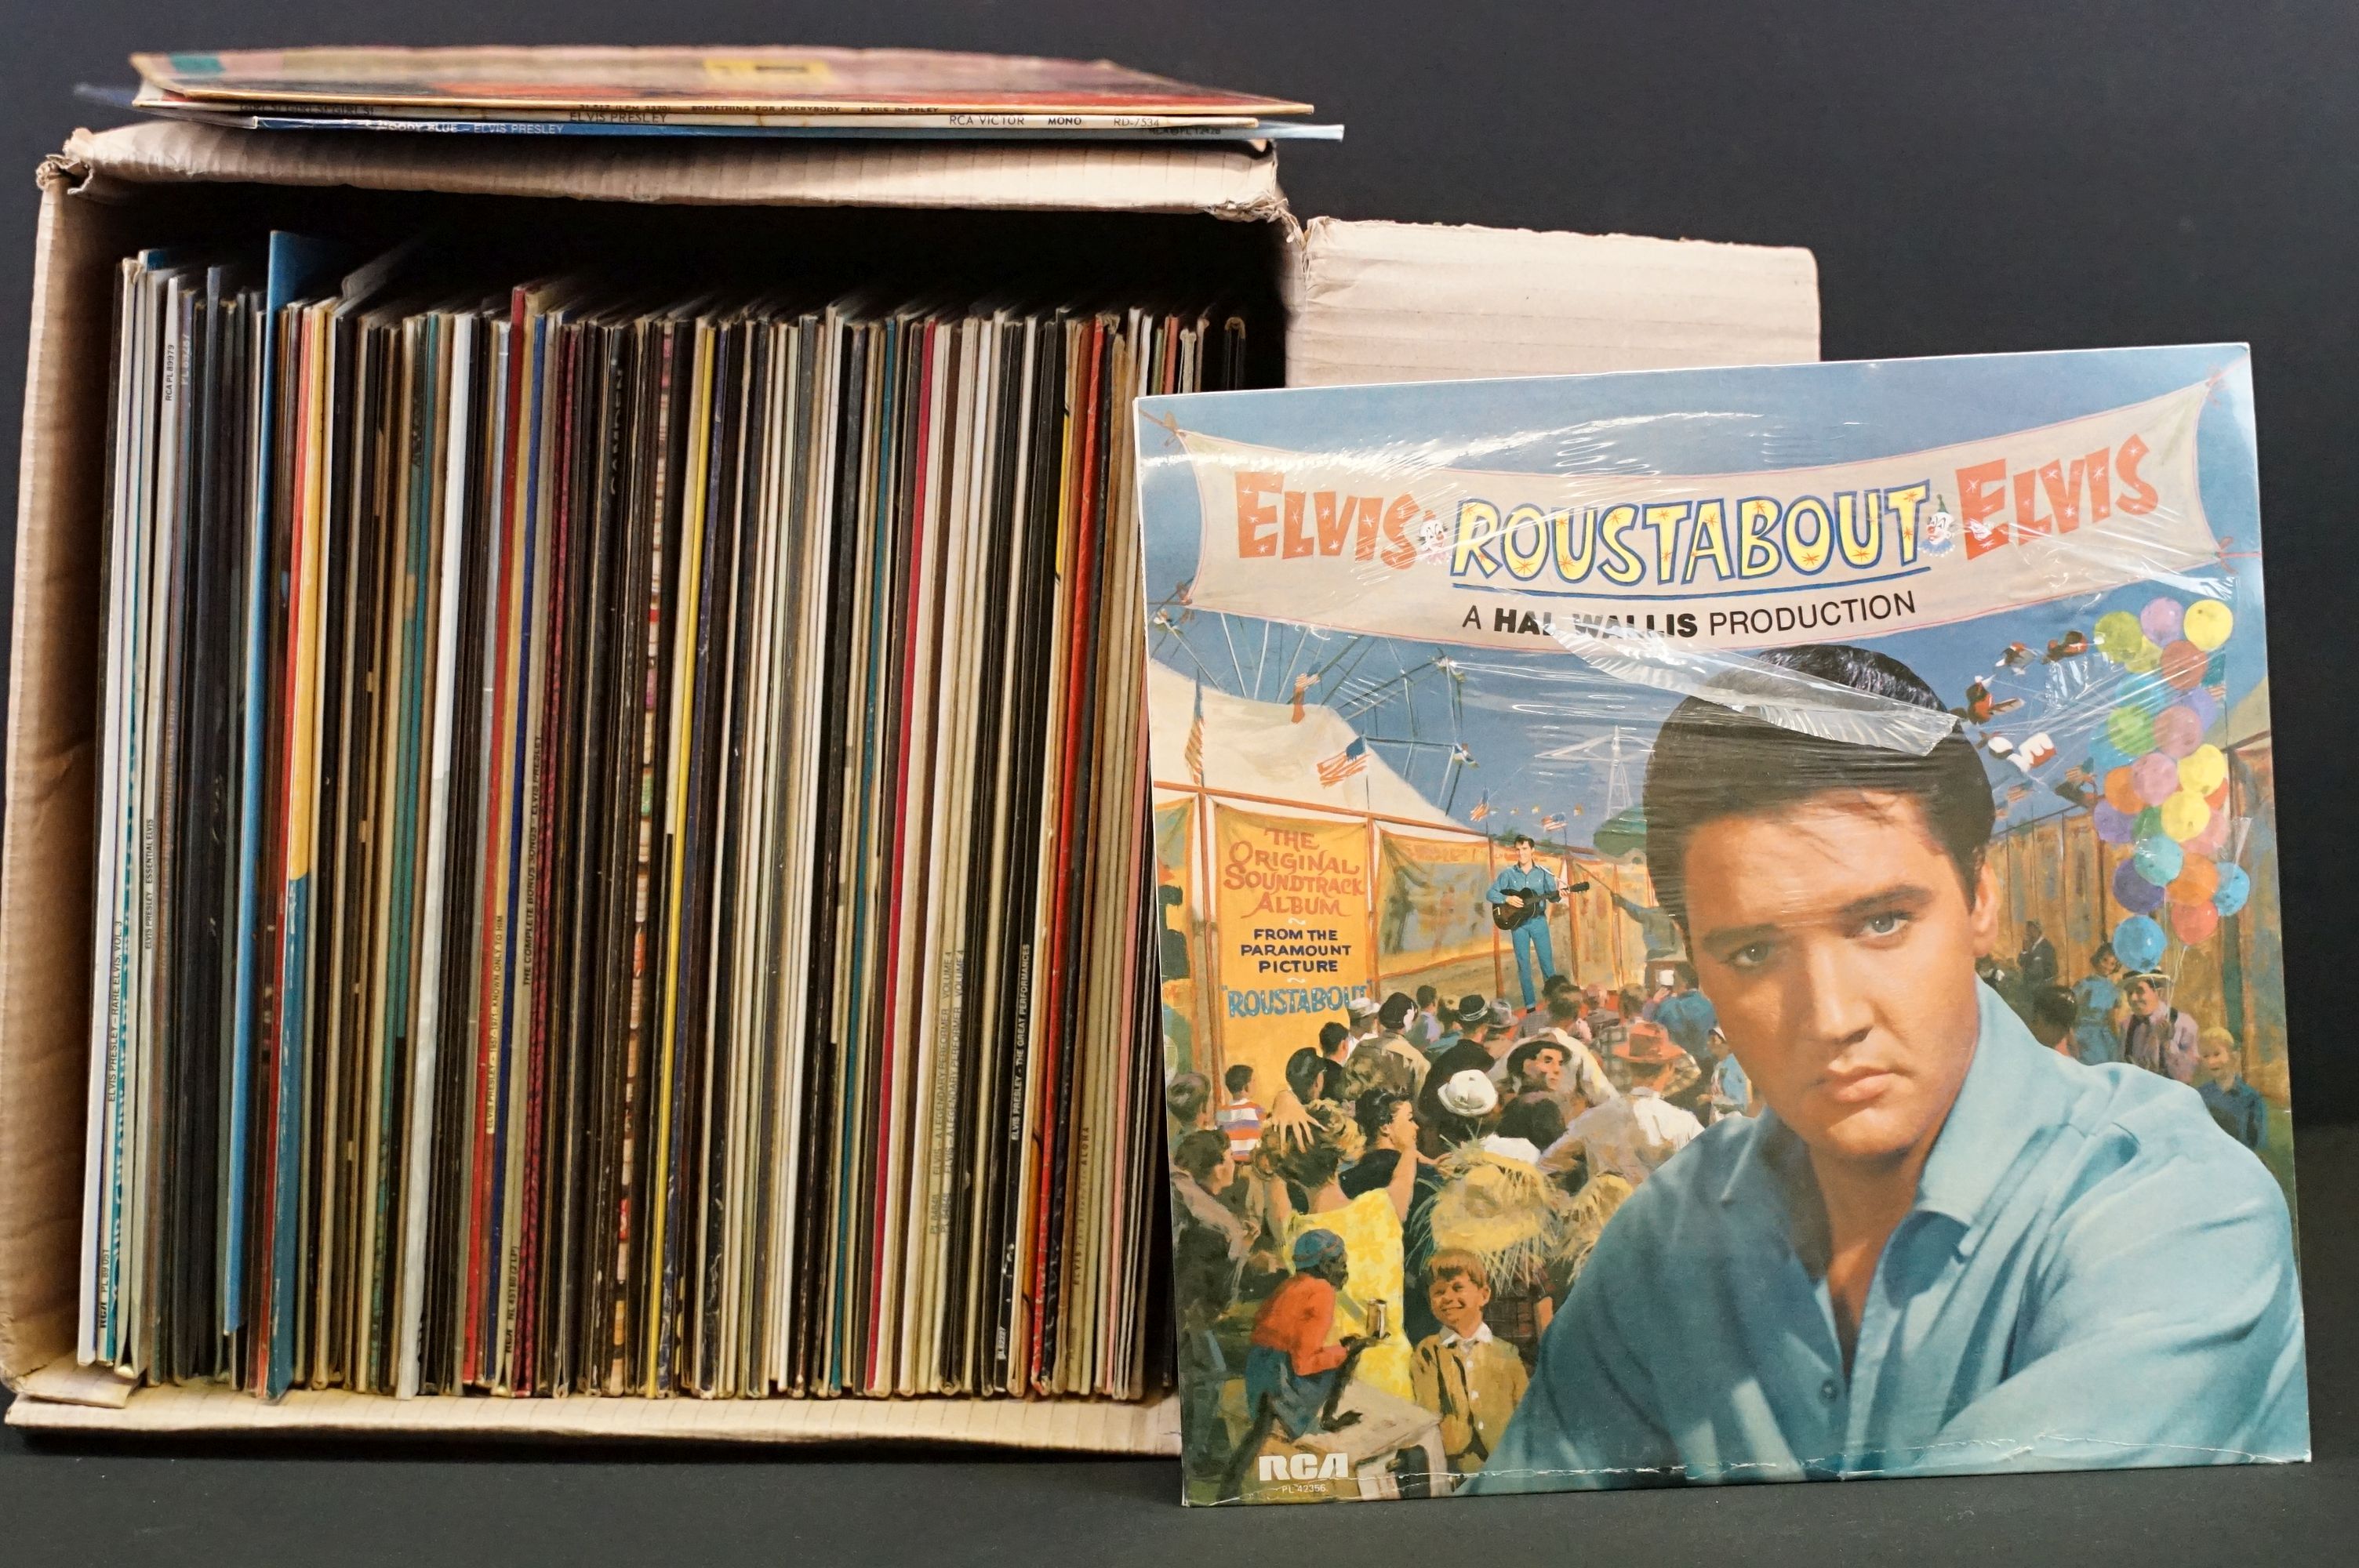 Vinyl - Over 80 Elvis Presley LPs spanning his career including foreign pressings, ltd editions